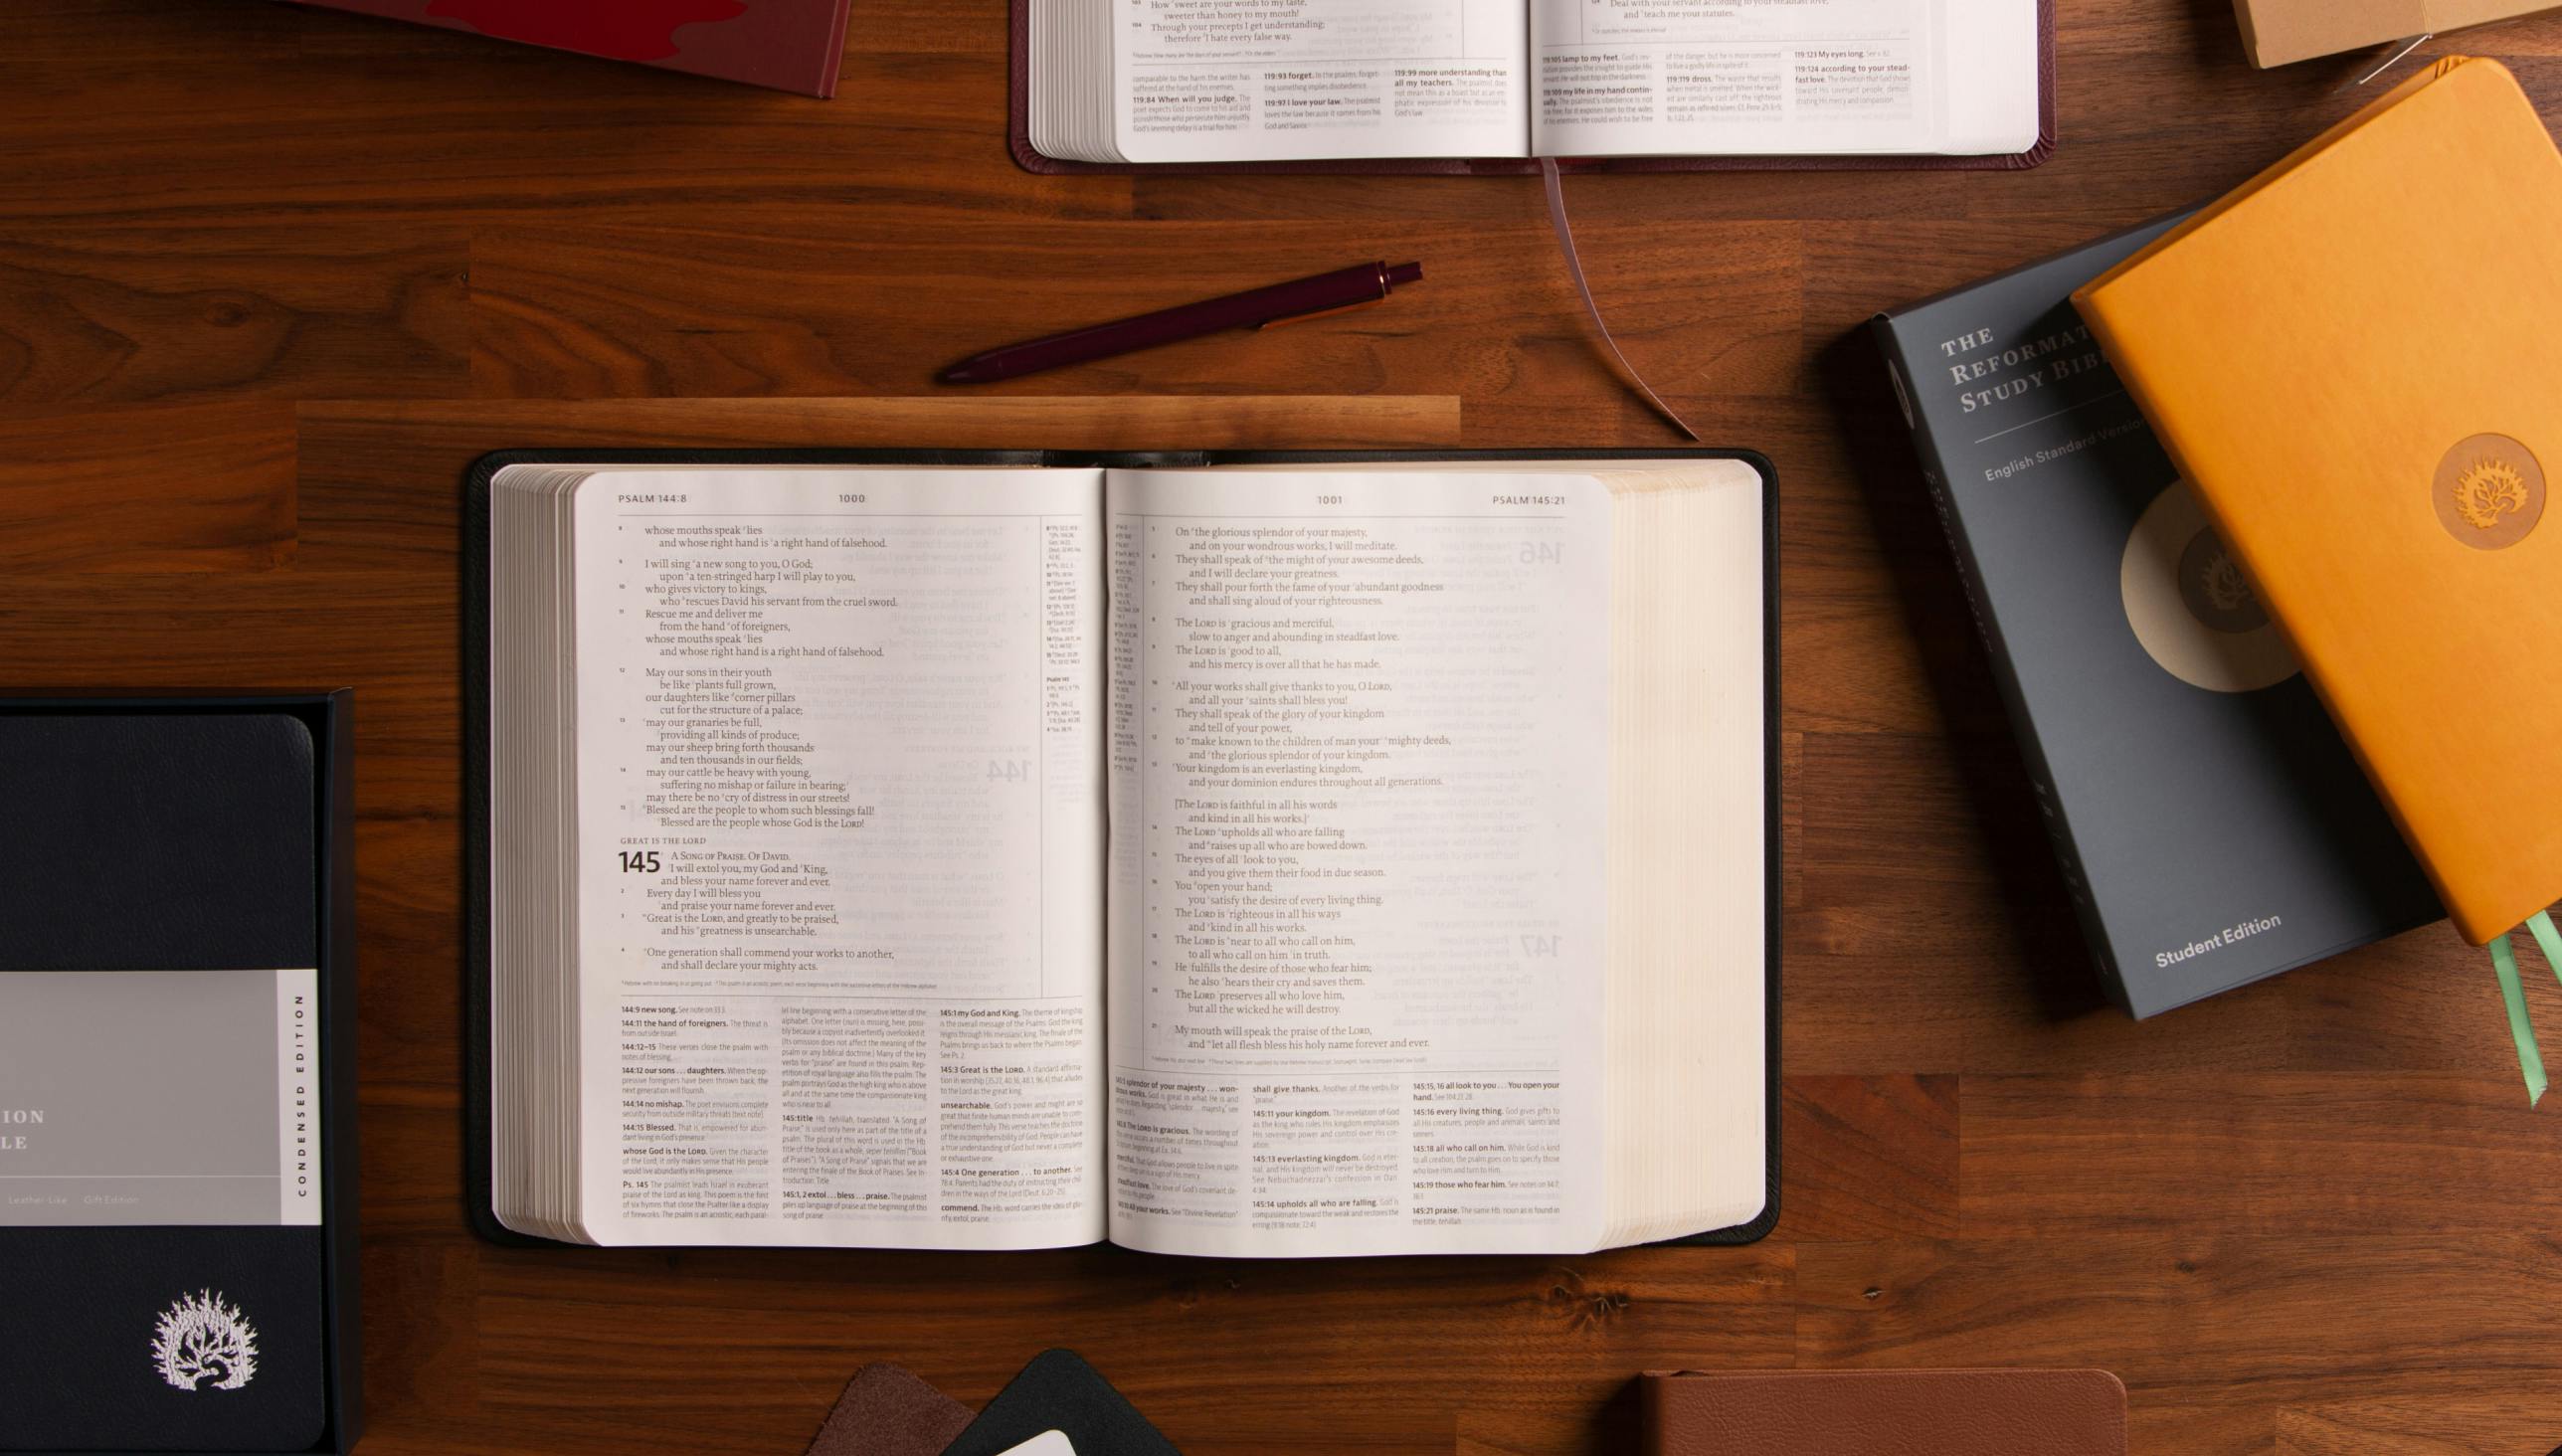 Reformation Study Bible open on table